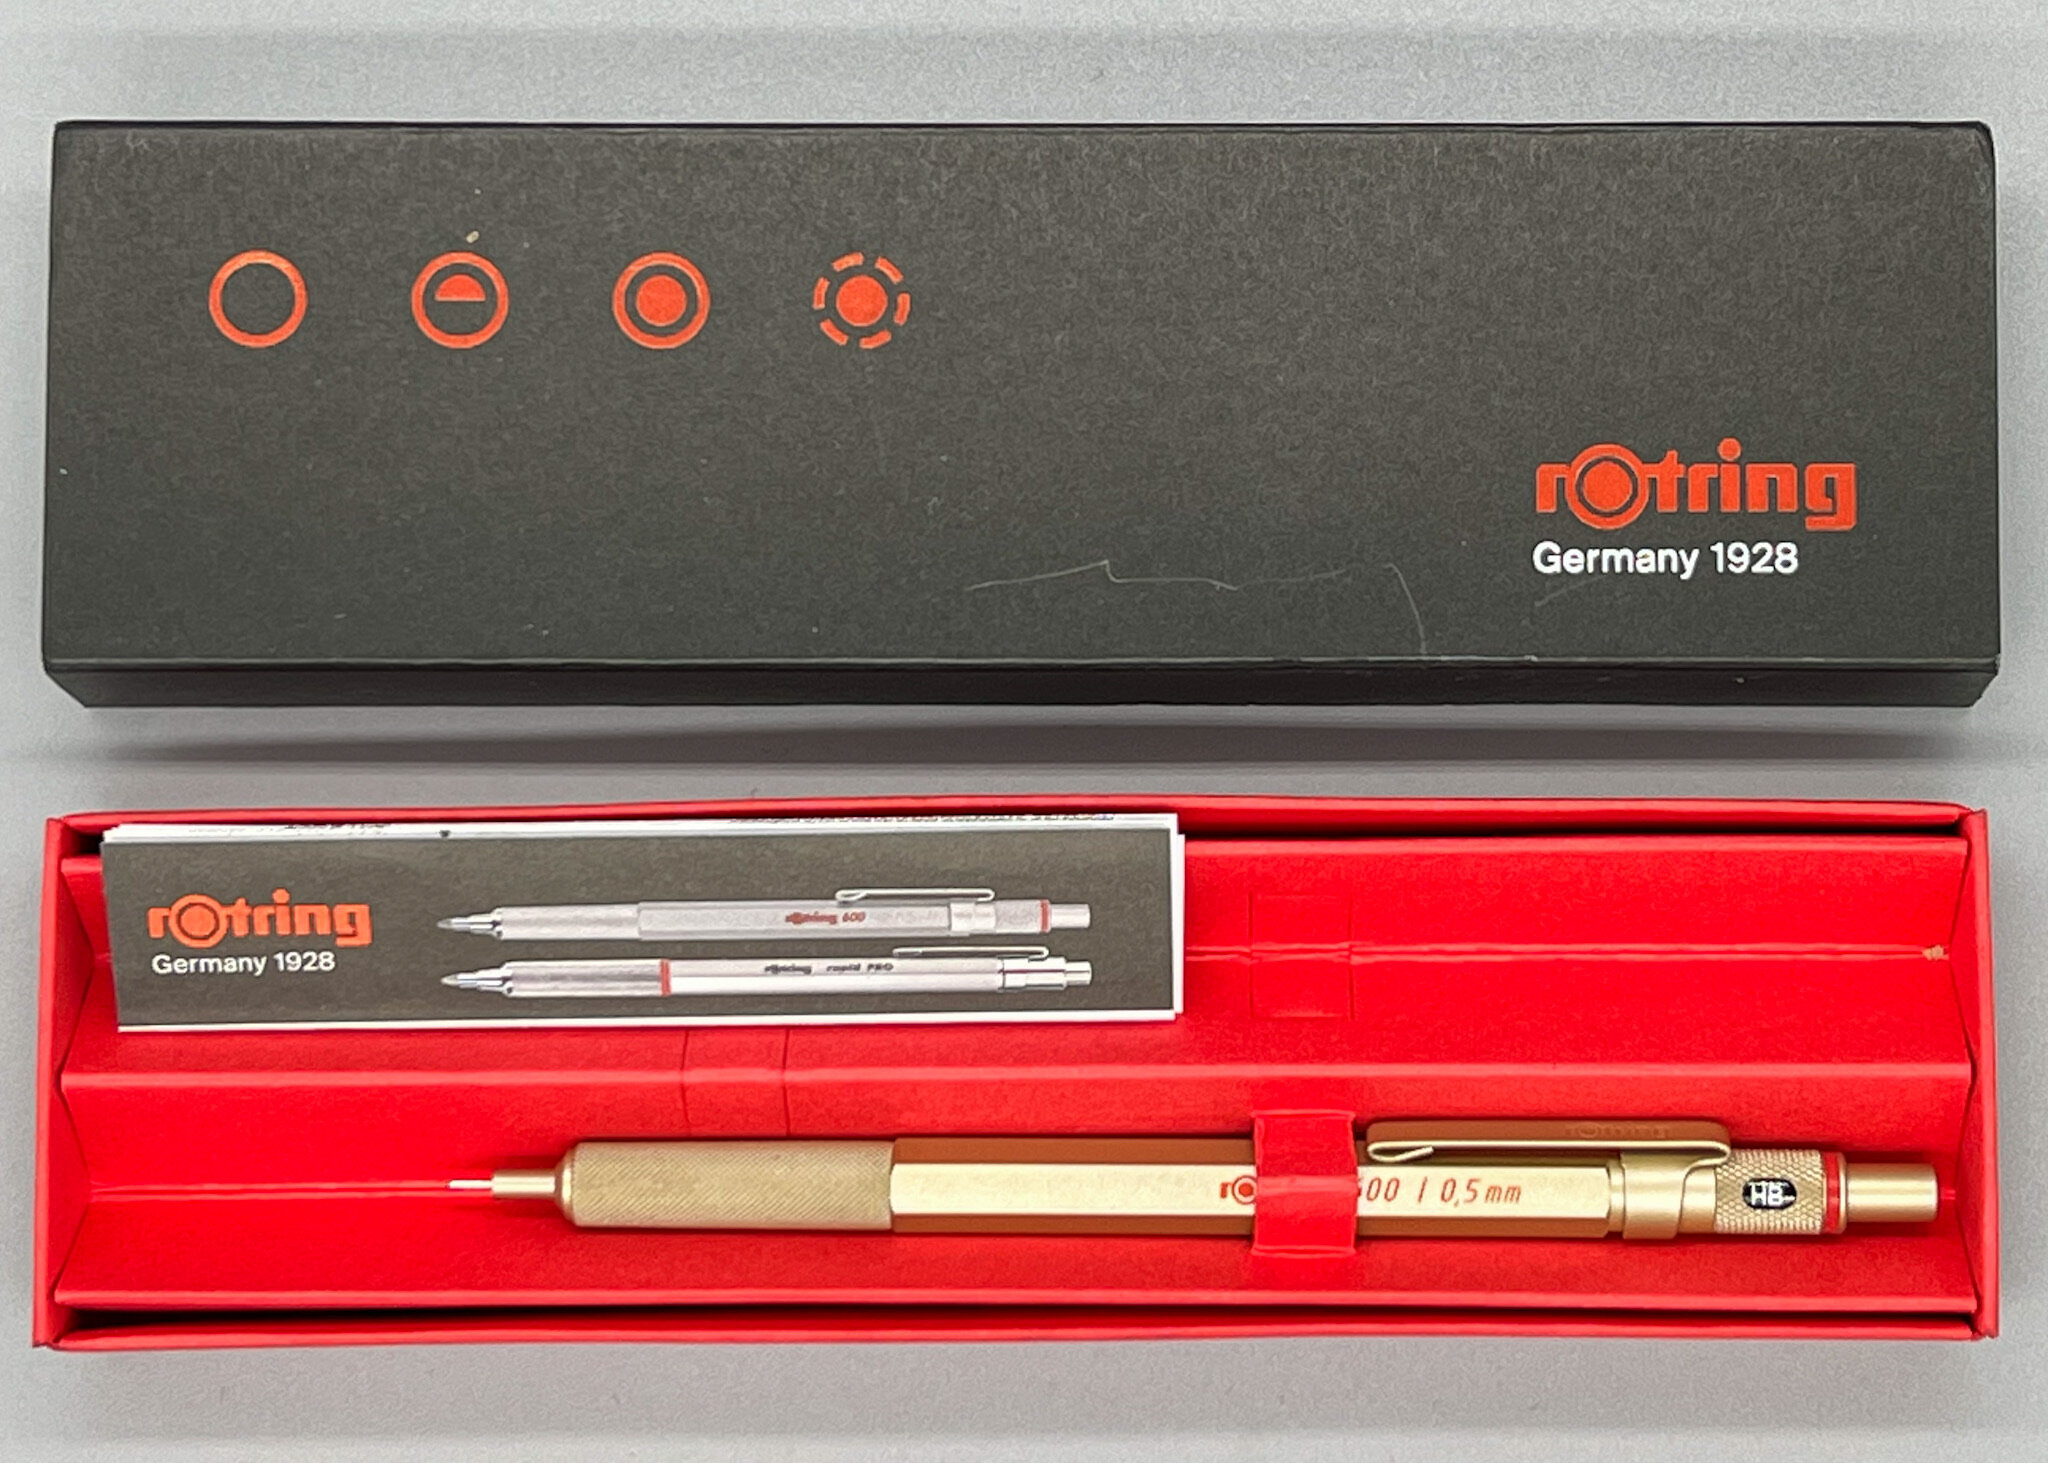 The rOtring 600 Lineup Lightens Up: Gold, Rose Gold, and Pearl White —  Penquisition